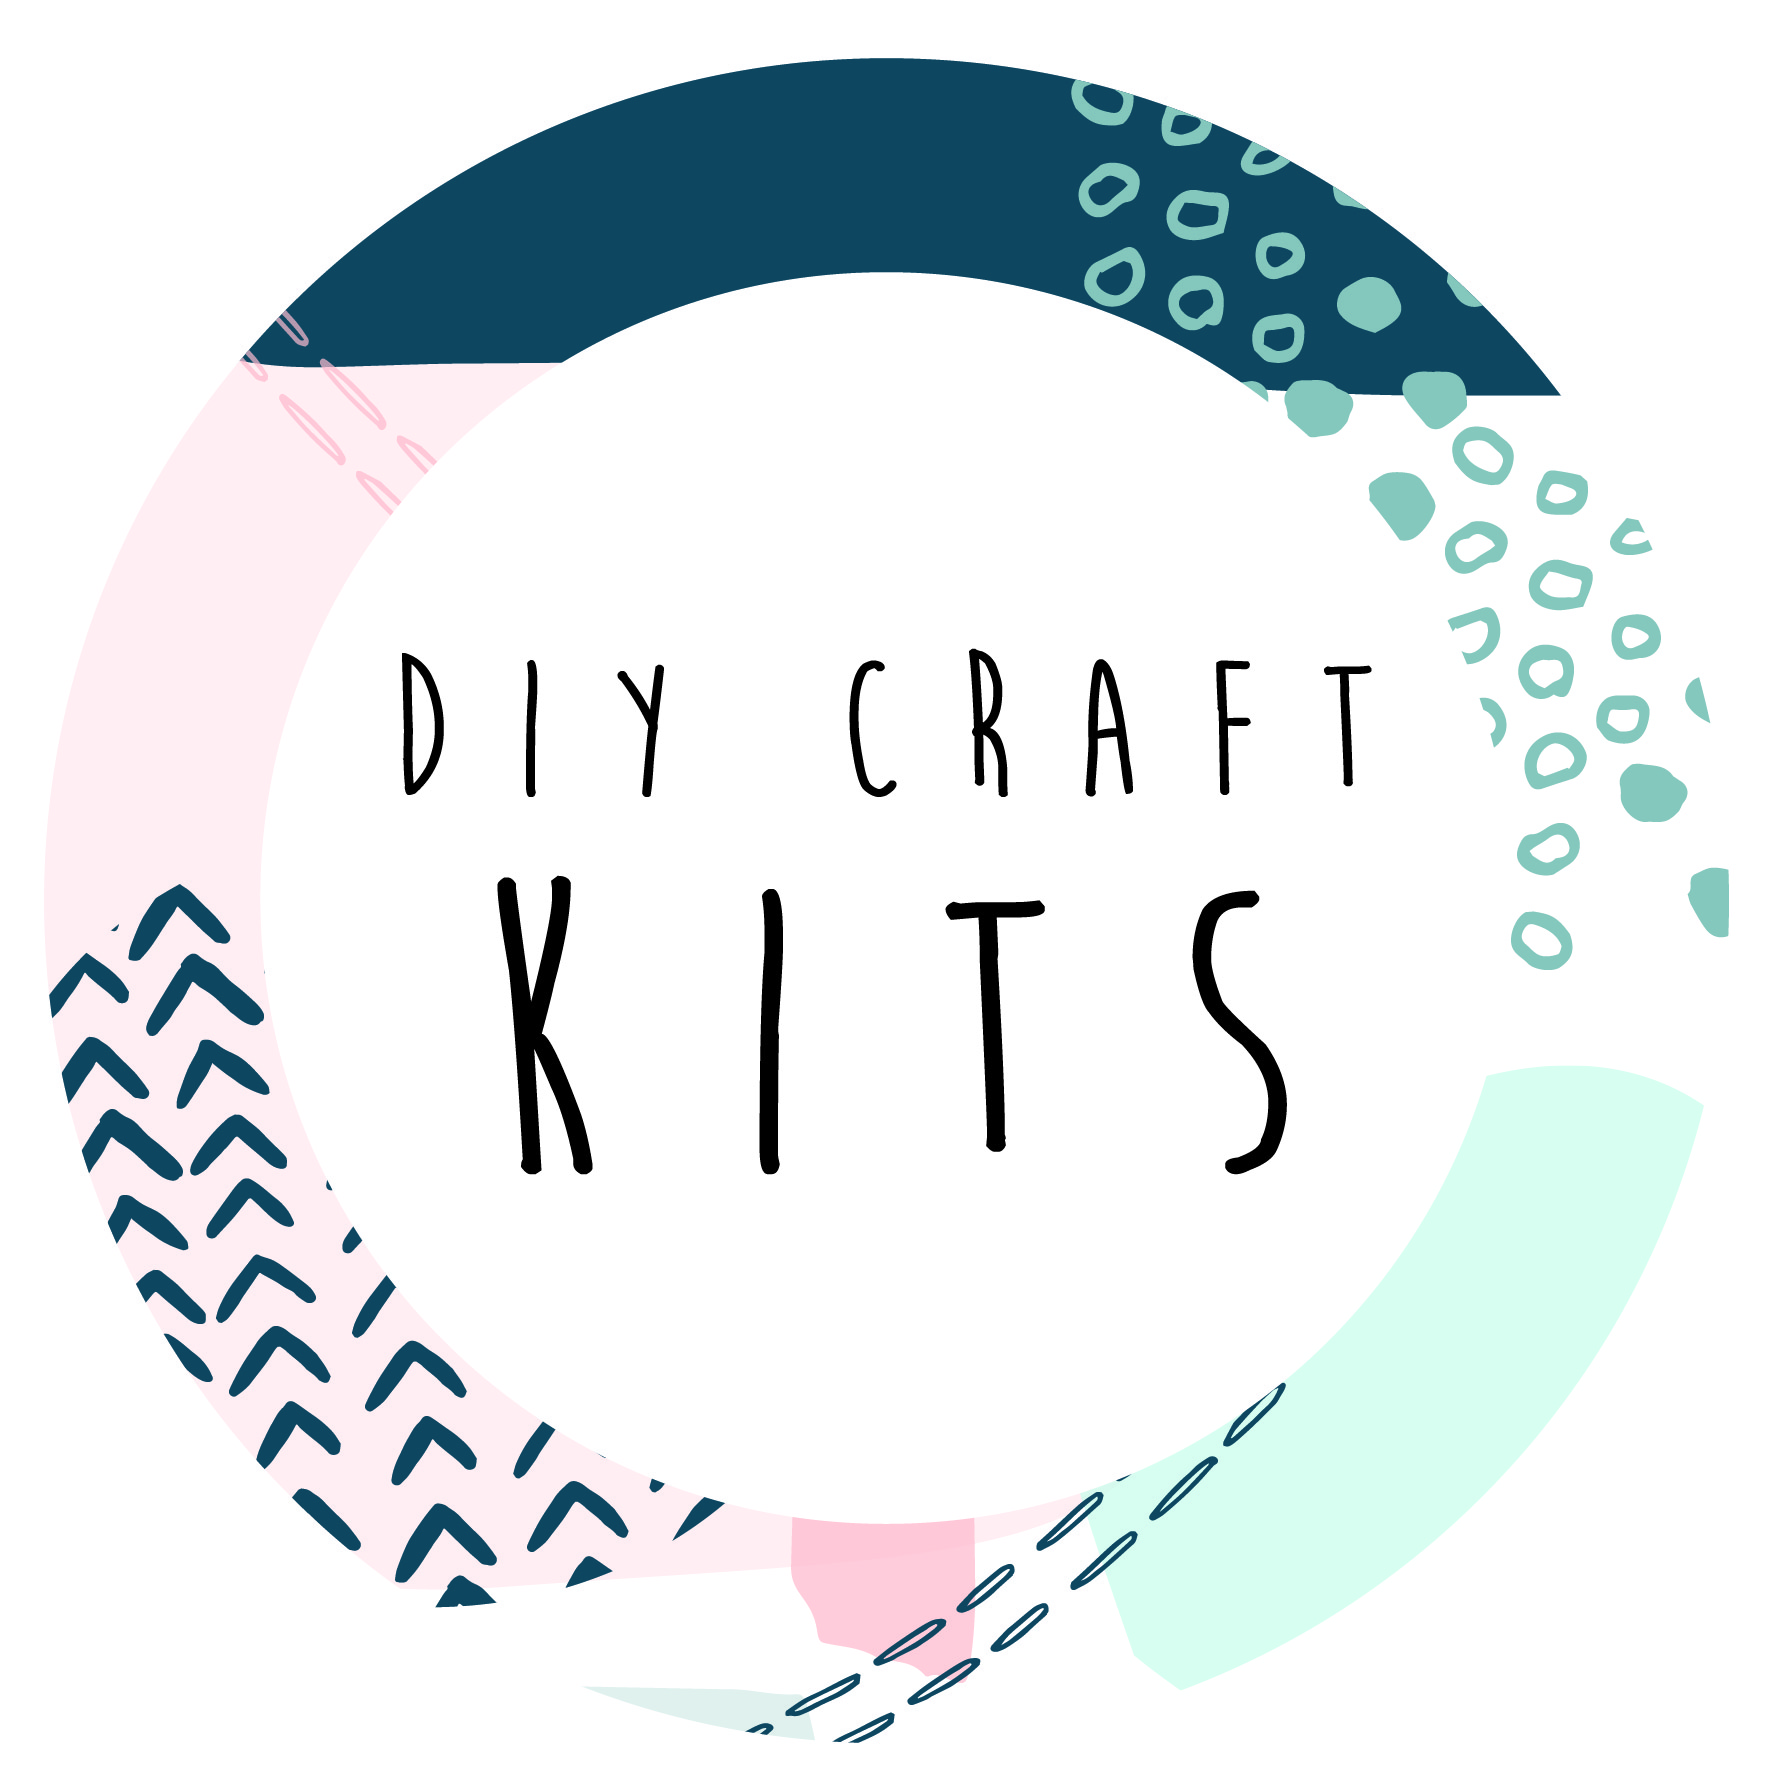 Craft kits to make your own.jpg